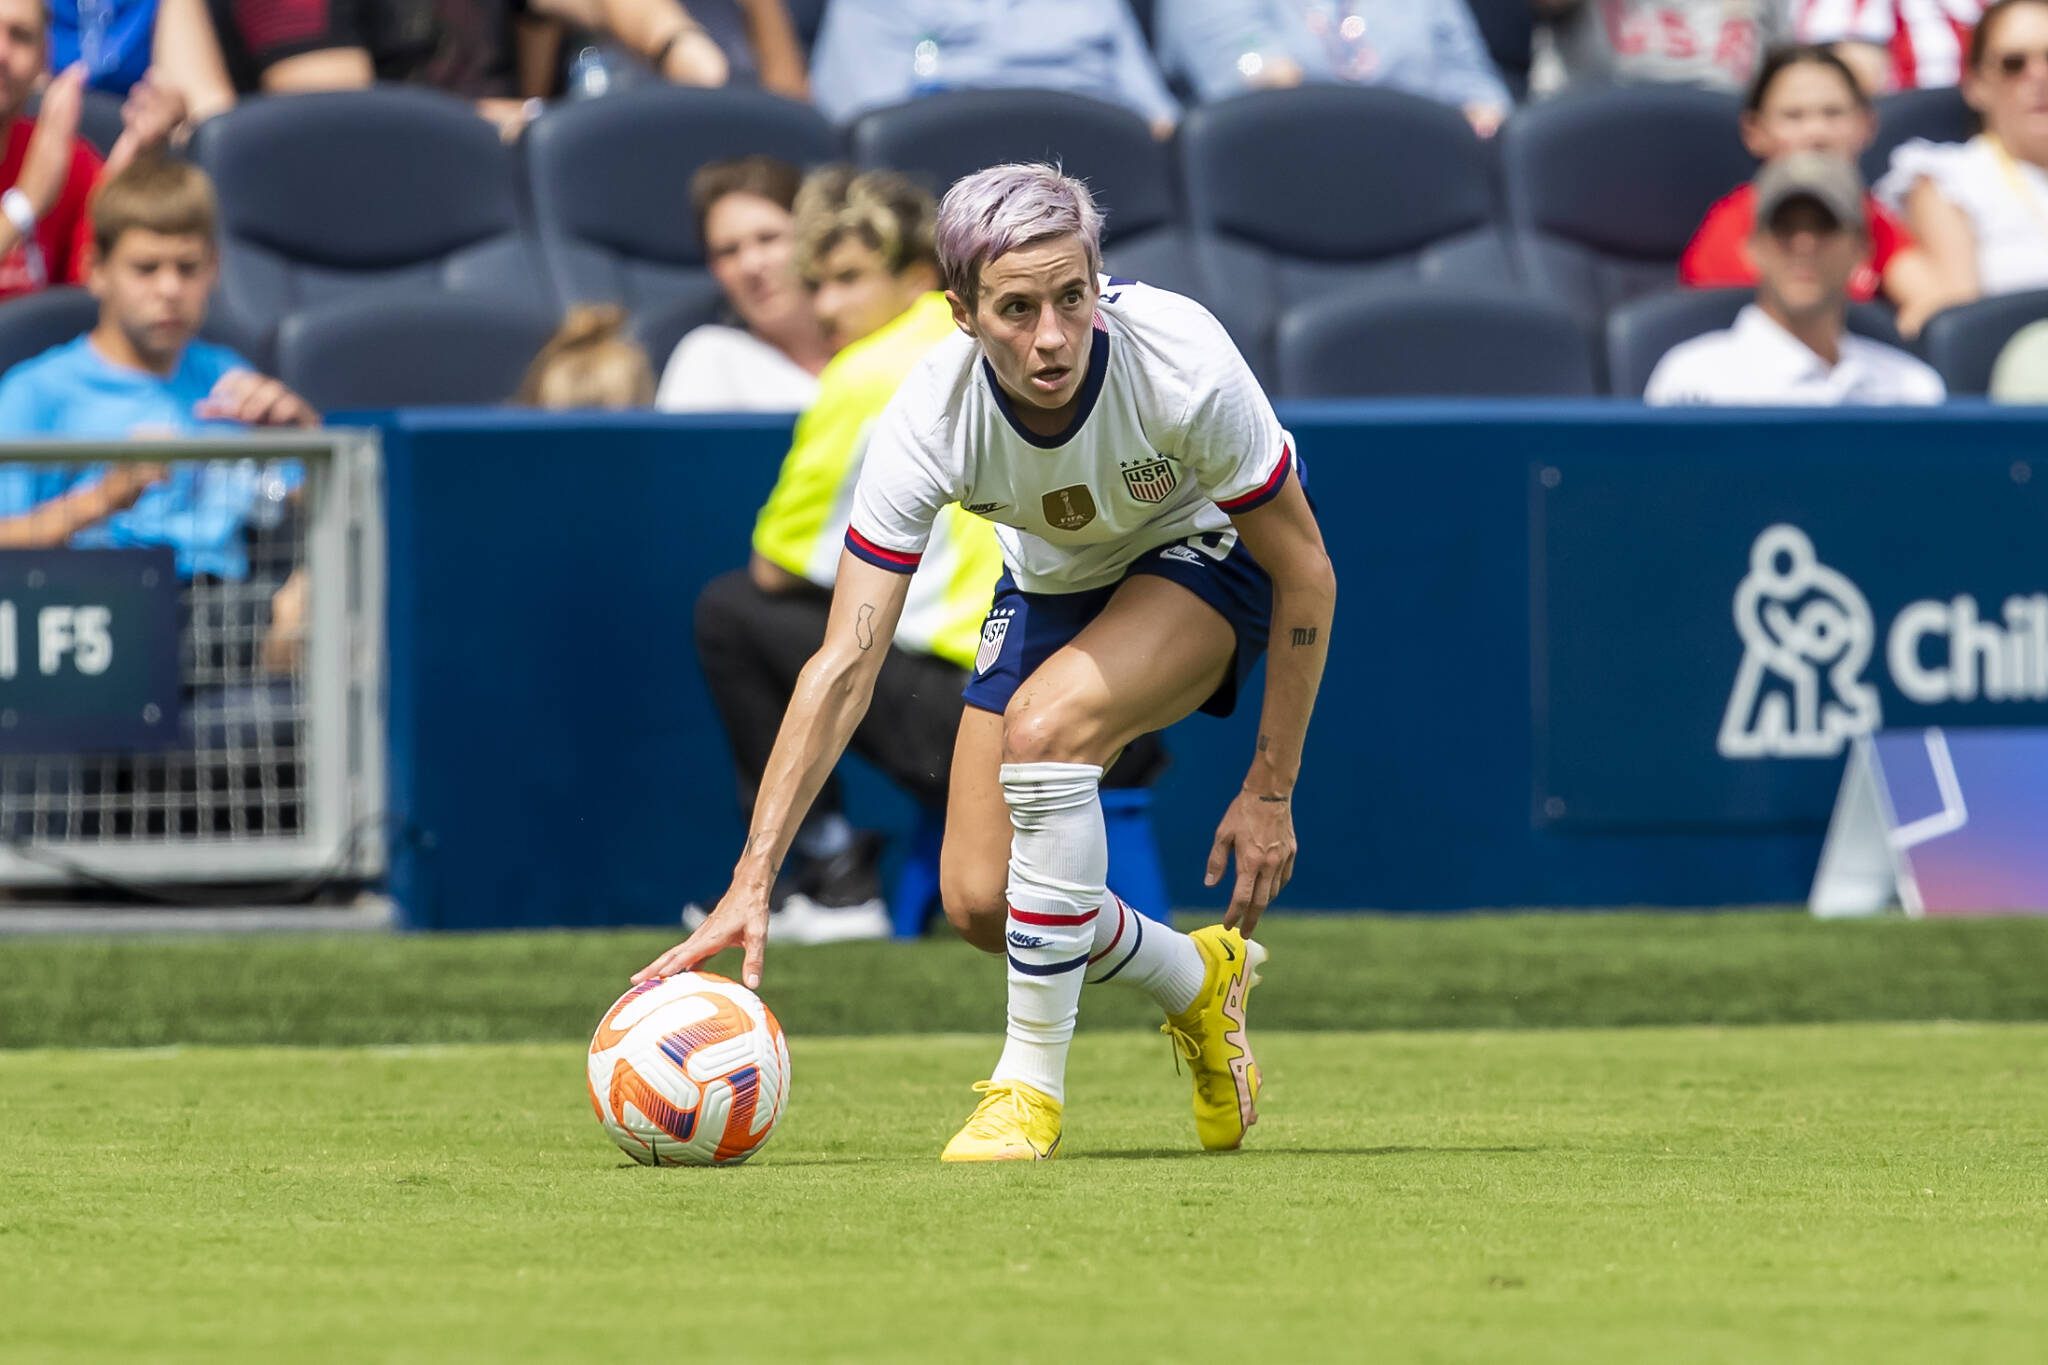 United States forward Megan Rapinoe resets the ball during an international friendly against Nigeria on Sept. 3, 2022, in Kansas City, Kan. (AP Photo/Nick Tre. Smith)